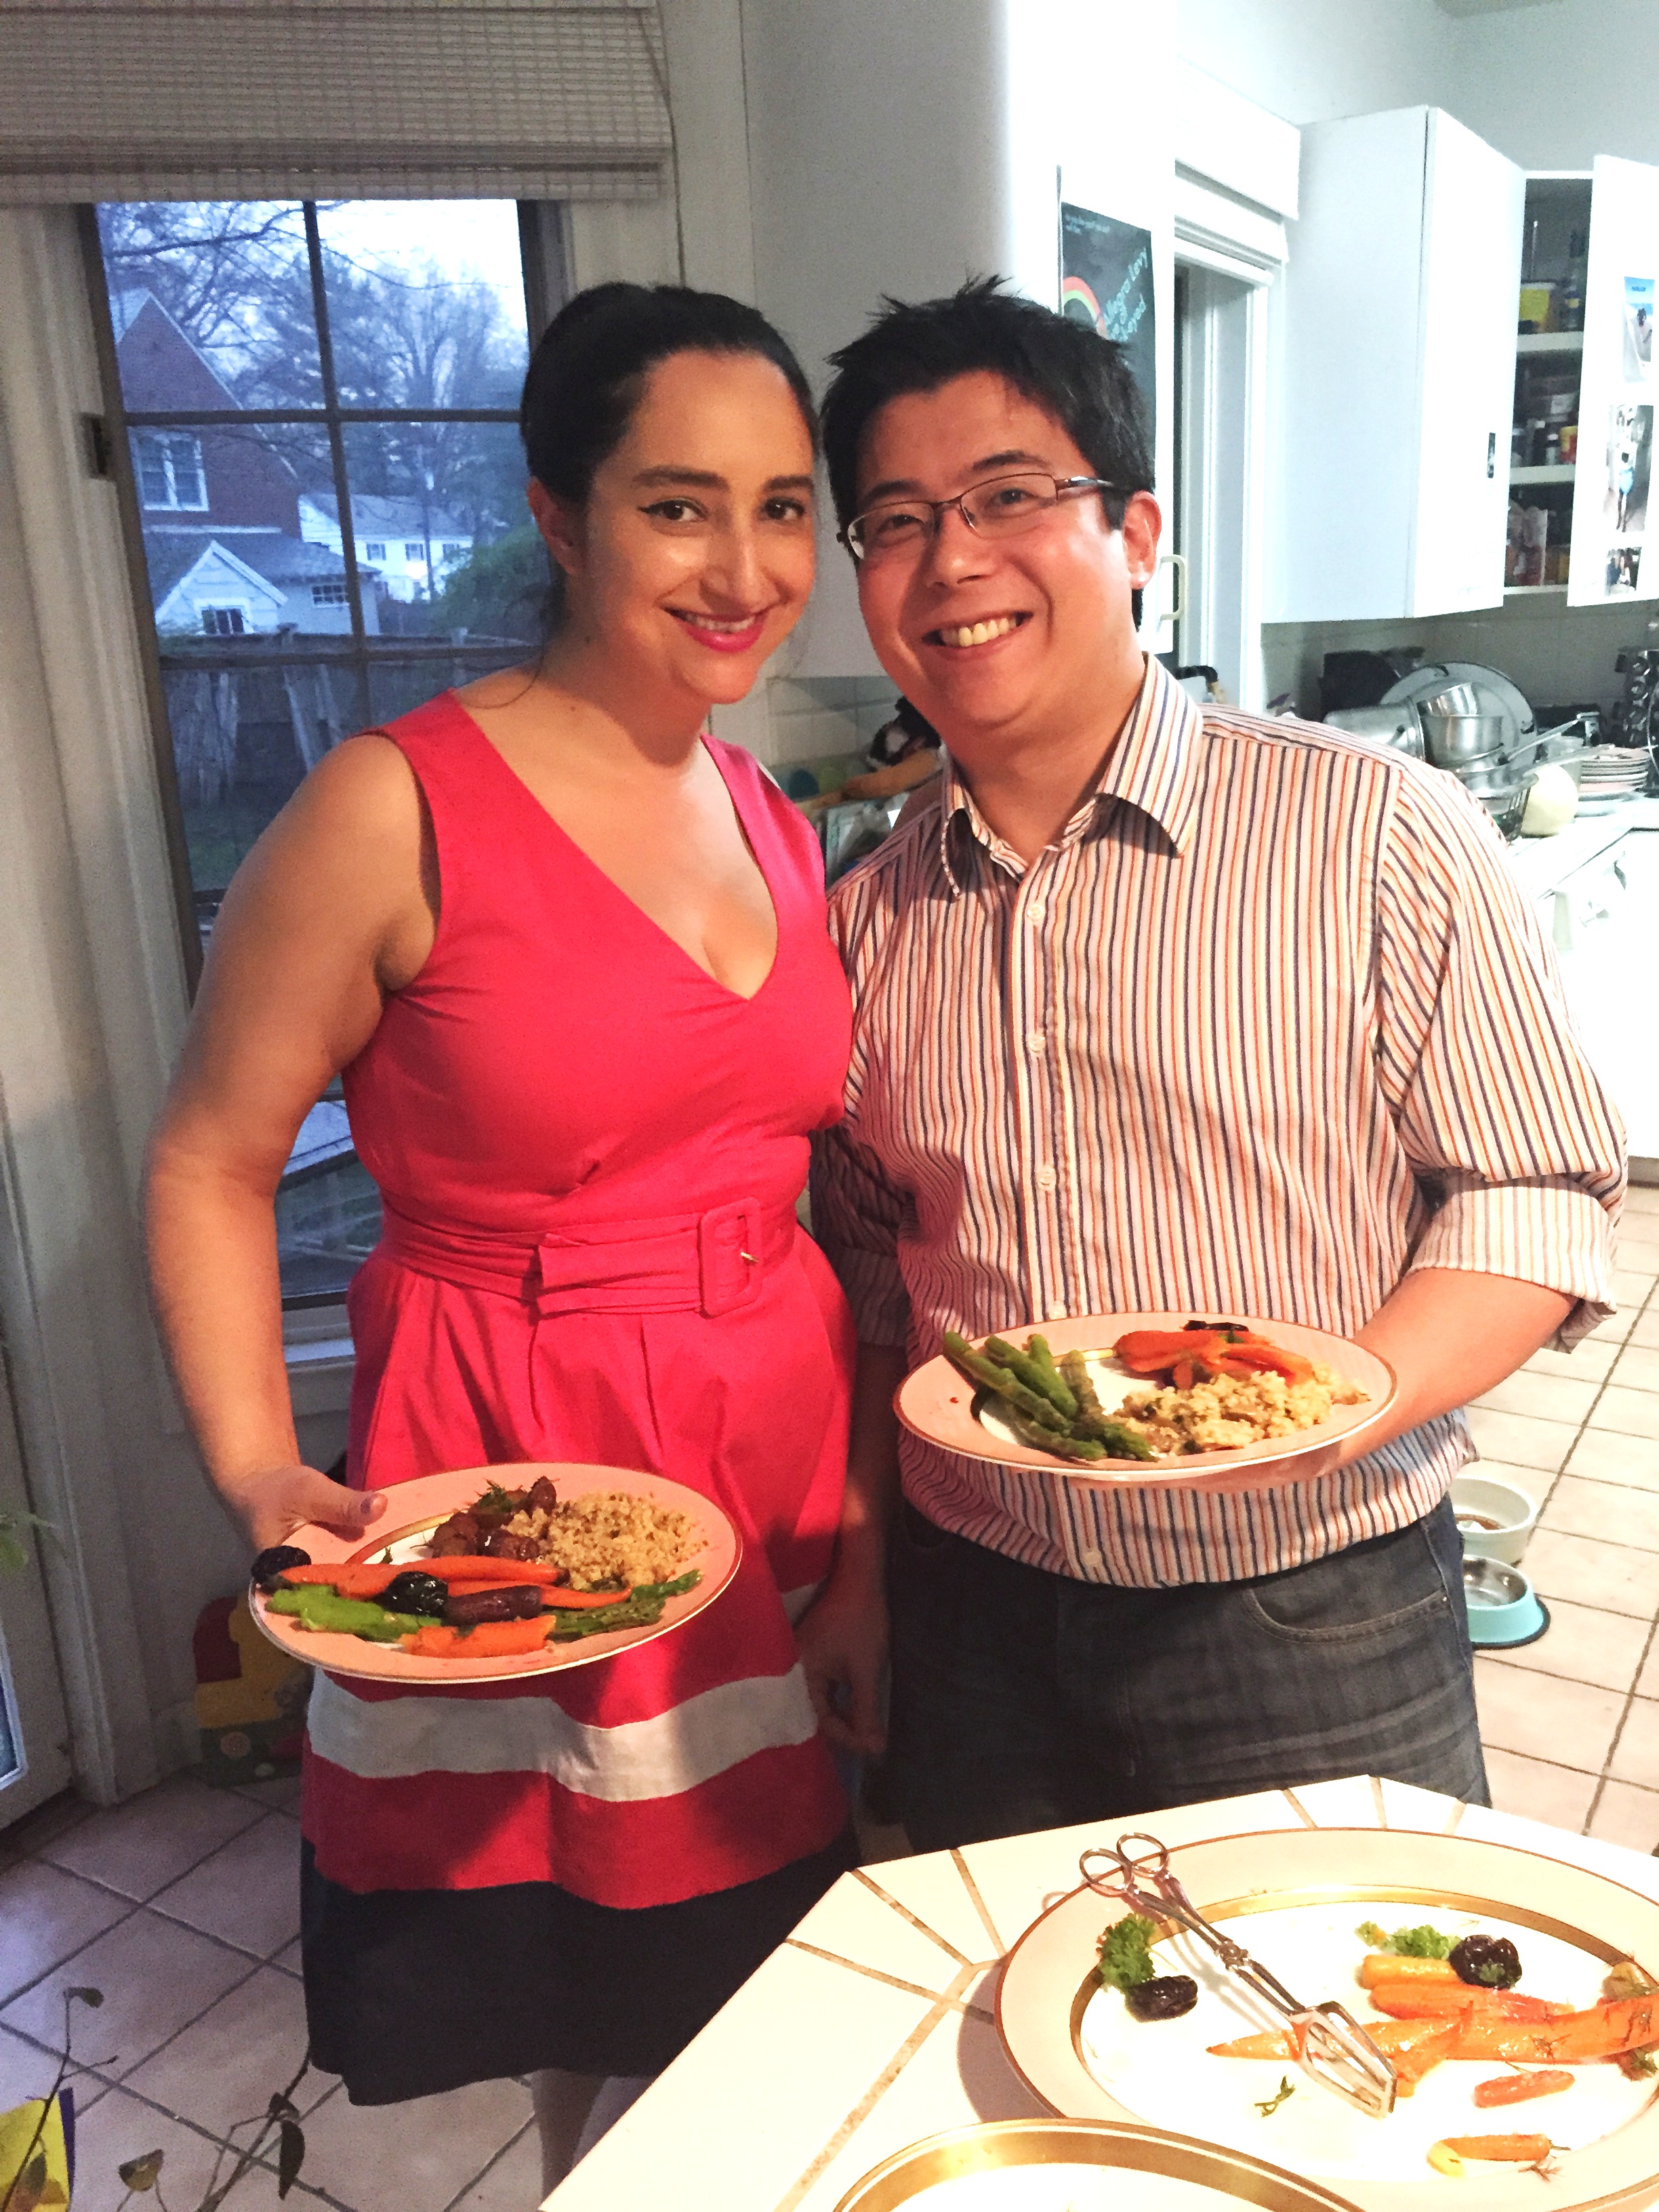 Allegra and JP at Passover.JPG